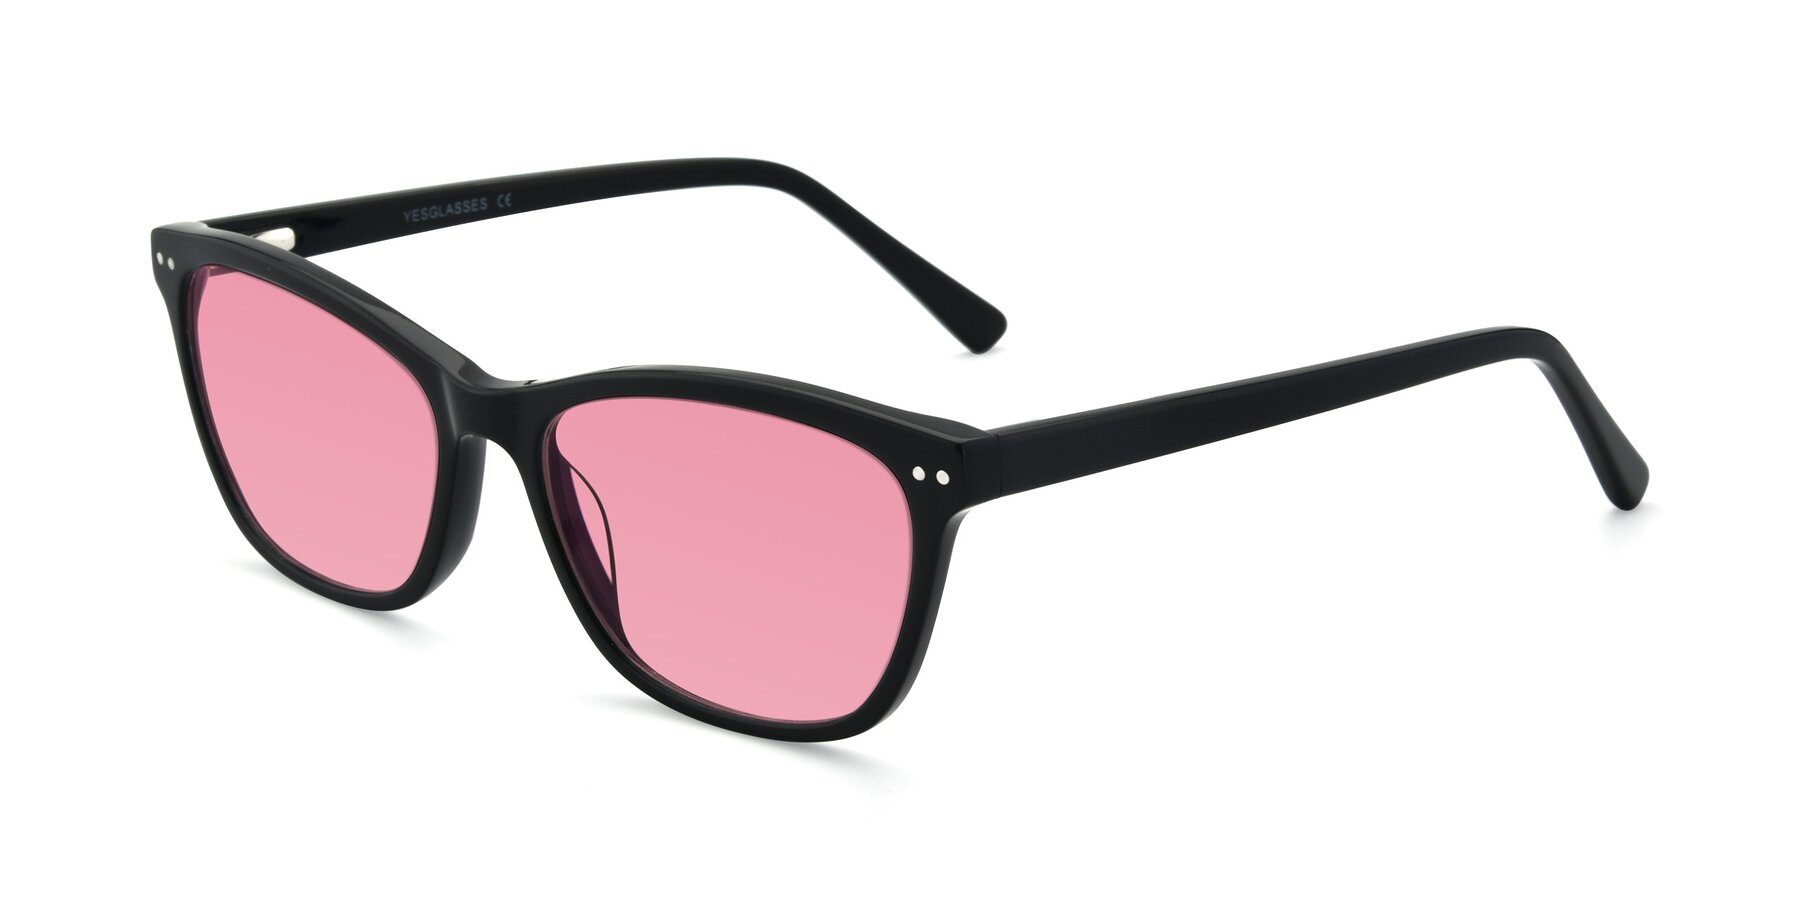 Angle of 17350 in Black with Pink Tinted Lenses